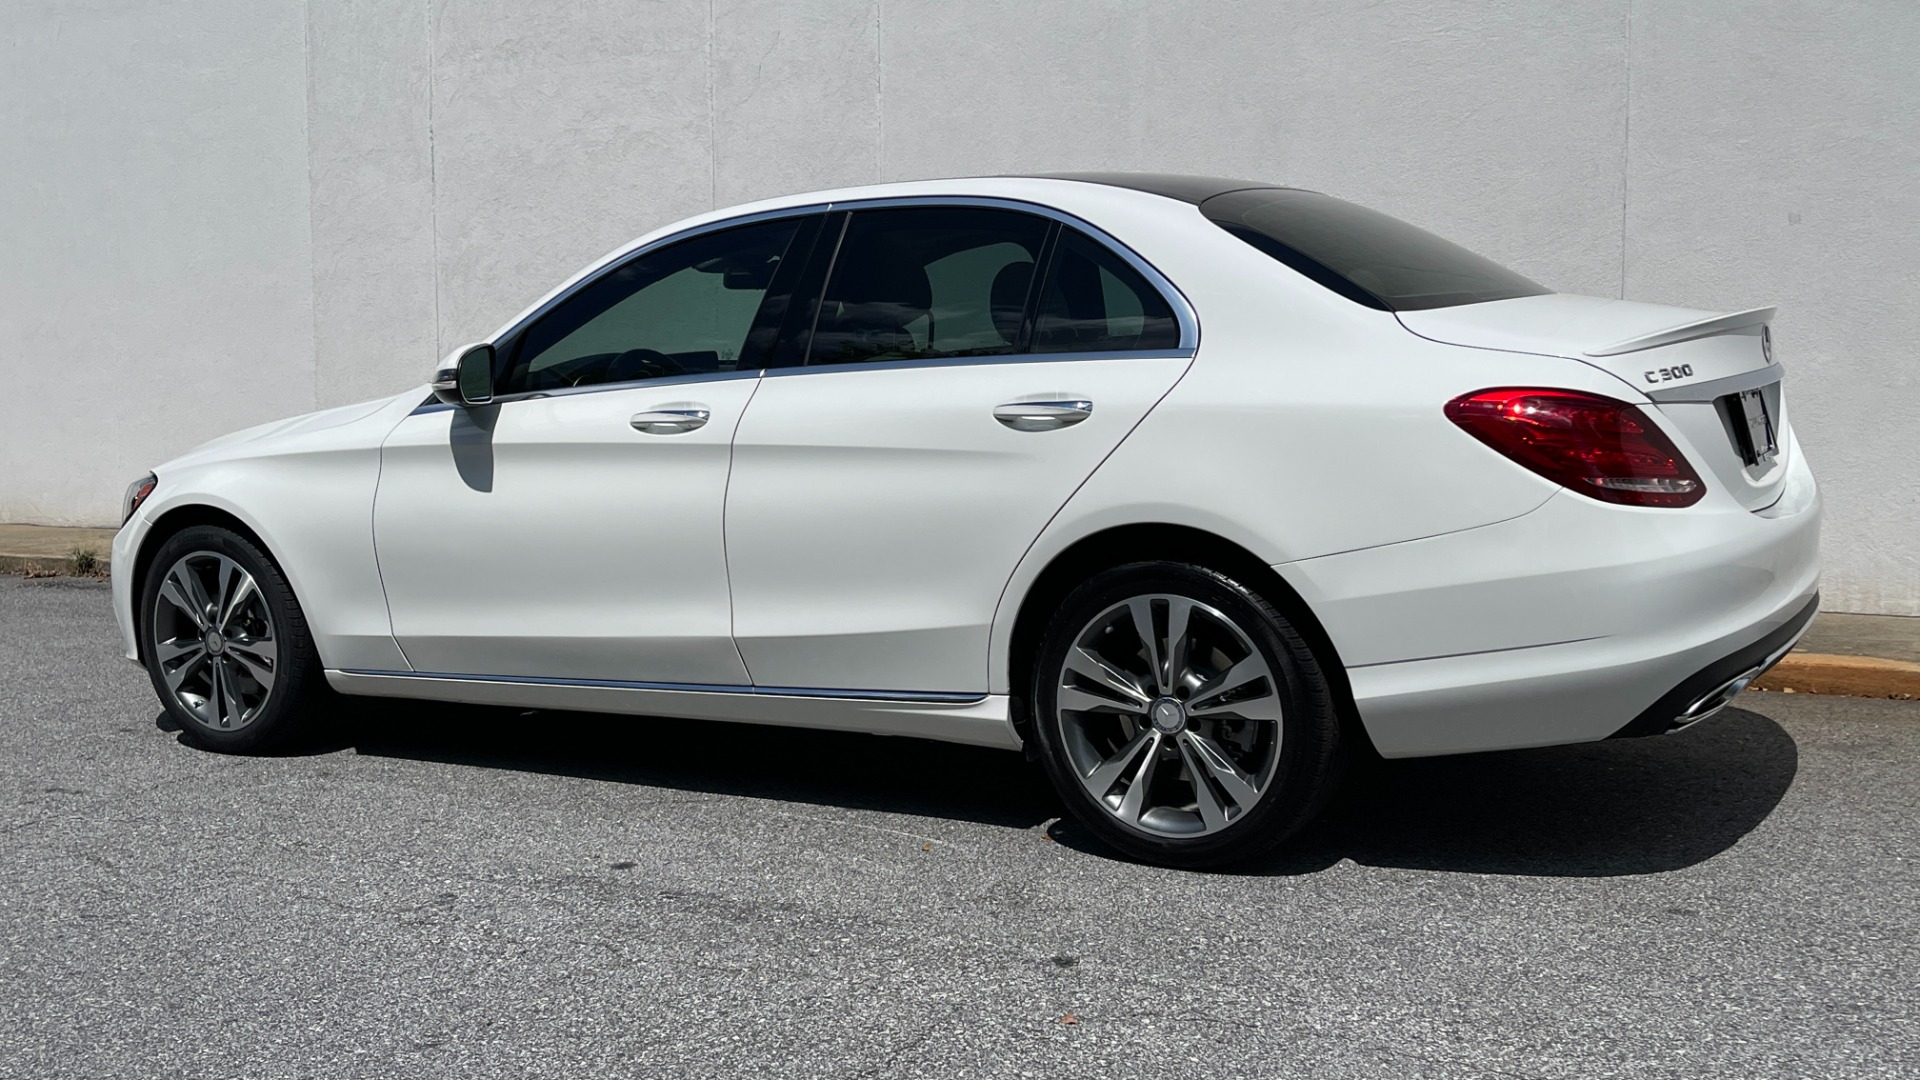 Used 2016 Mercedes-Benz C-Class C300 / 4MATIC / PREMIUM / LINDEN WOOD / ILLUMINATED STAR / MULTIMEDIA for sale $25,995 at Formula Imports in Charlotte NC 28227 5